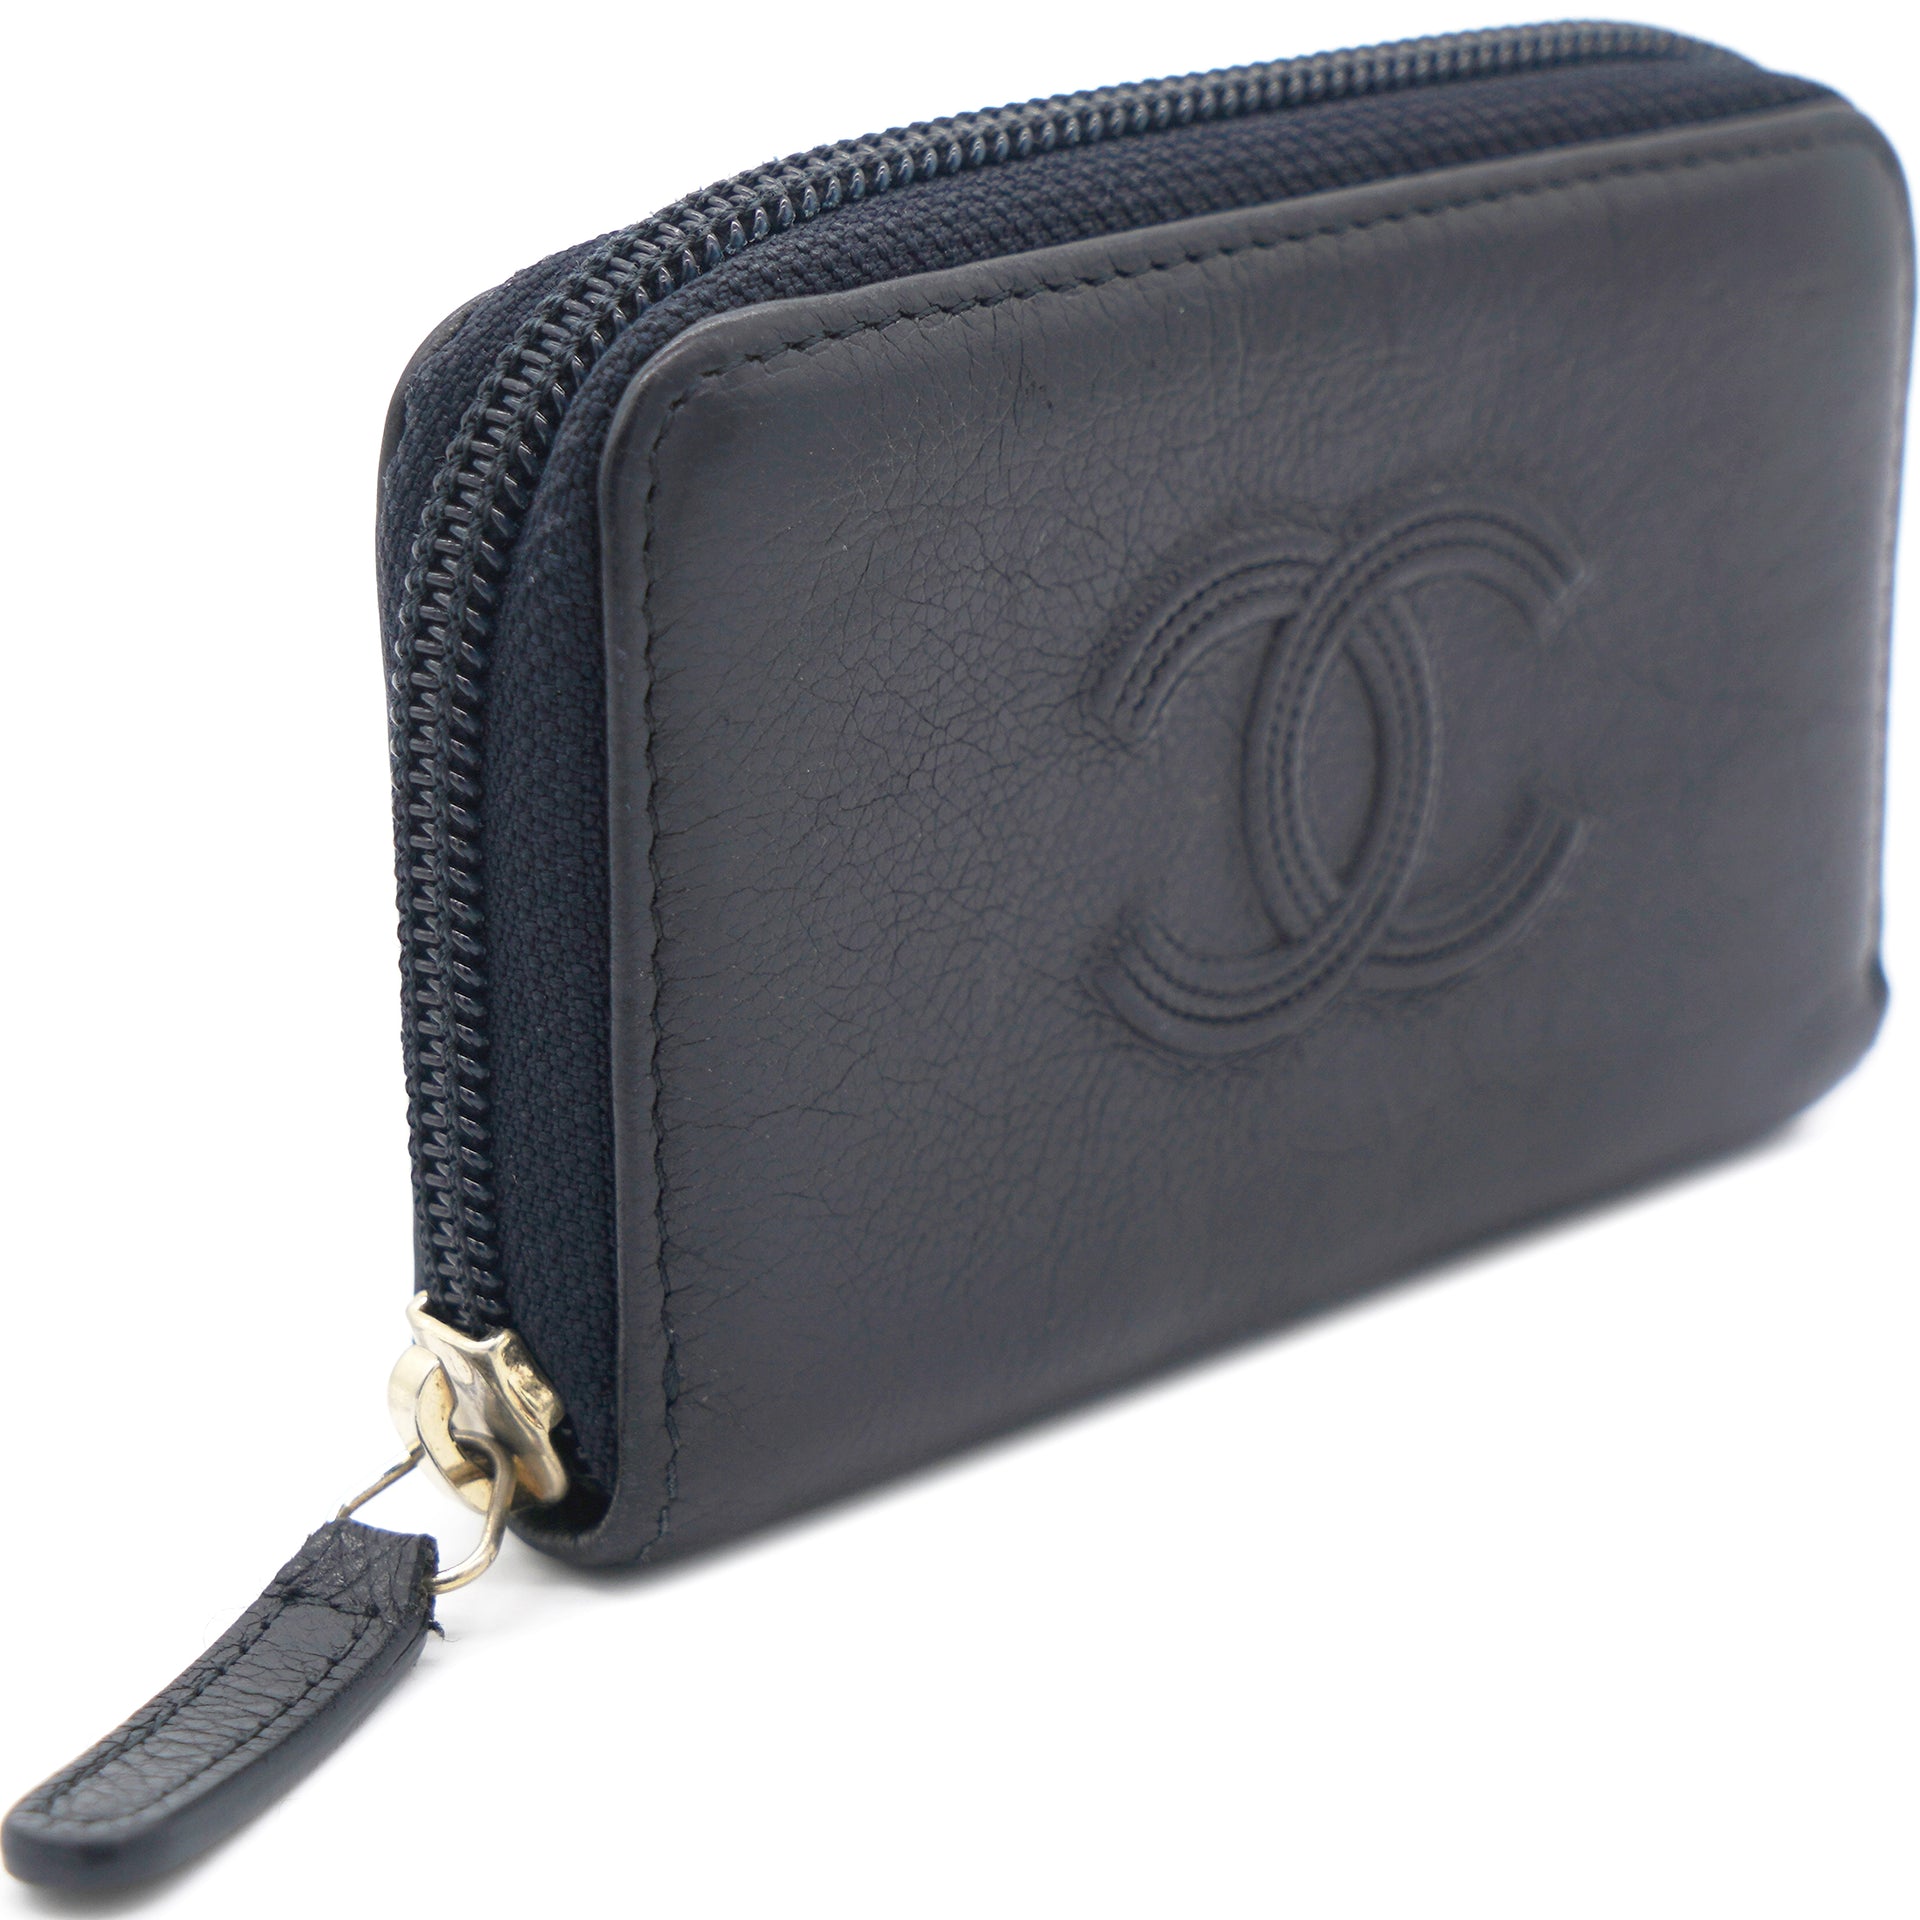 SYGA Womens Card Holder Coin Purse MultiCard Slot Case Zipper Small Leather  Wallet Online in India, Buy at Best Price from Firstcry.com - 15751529